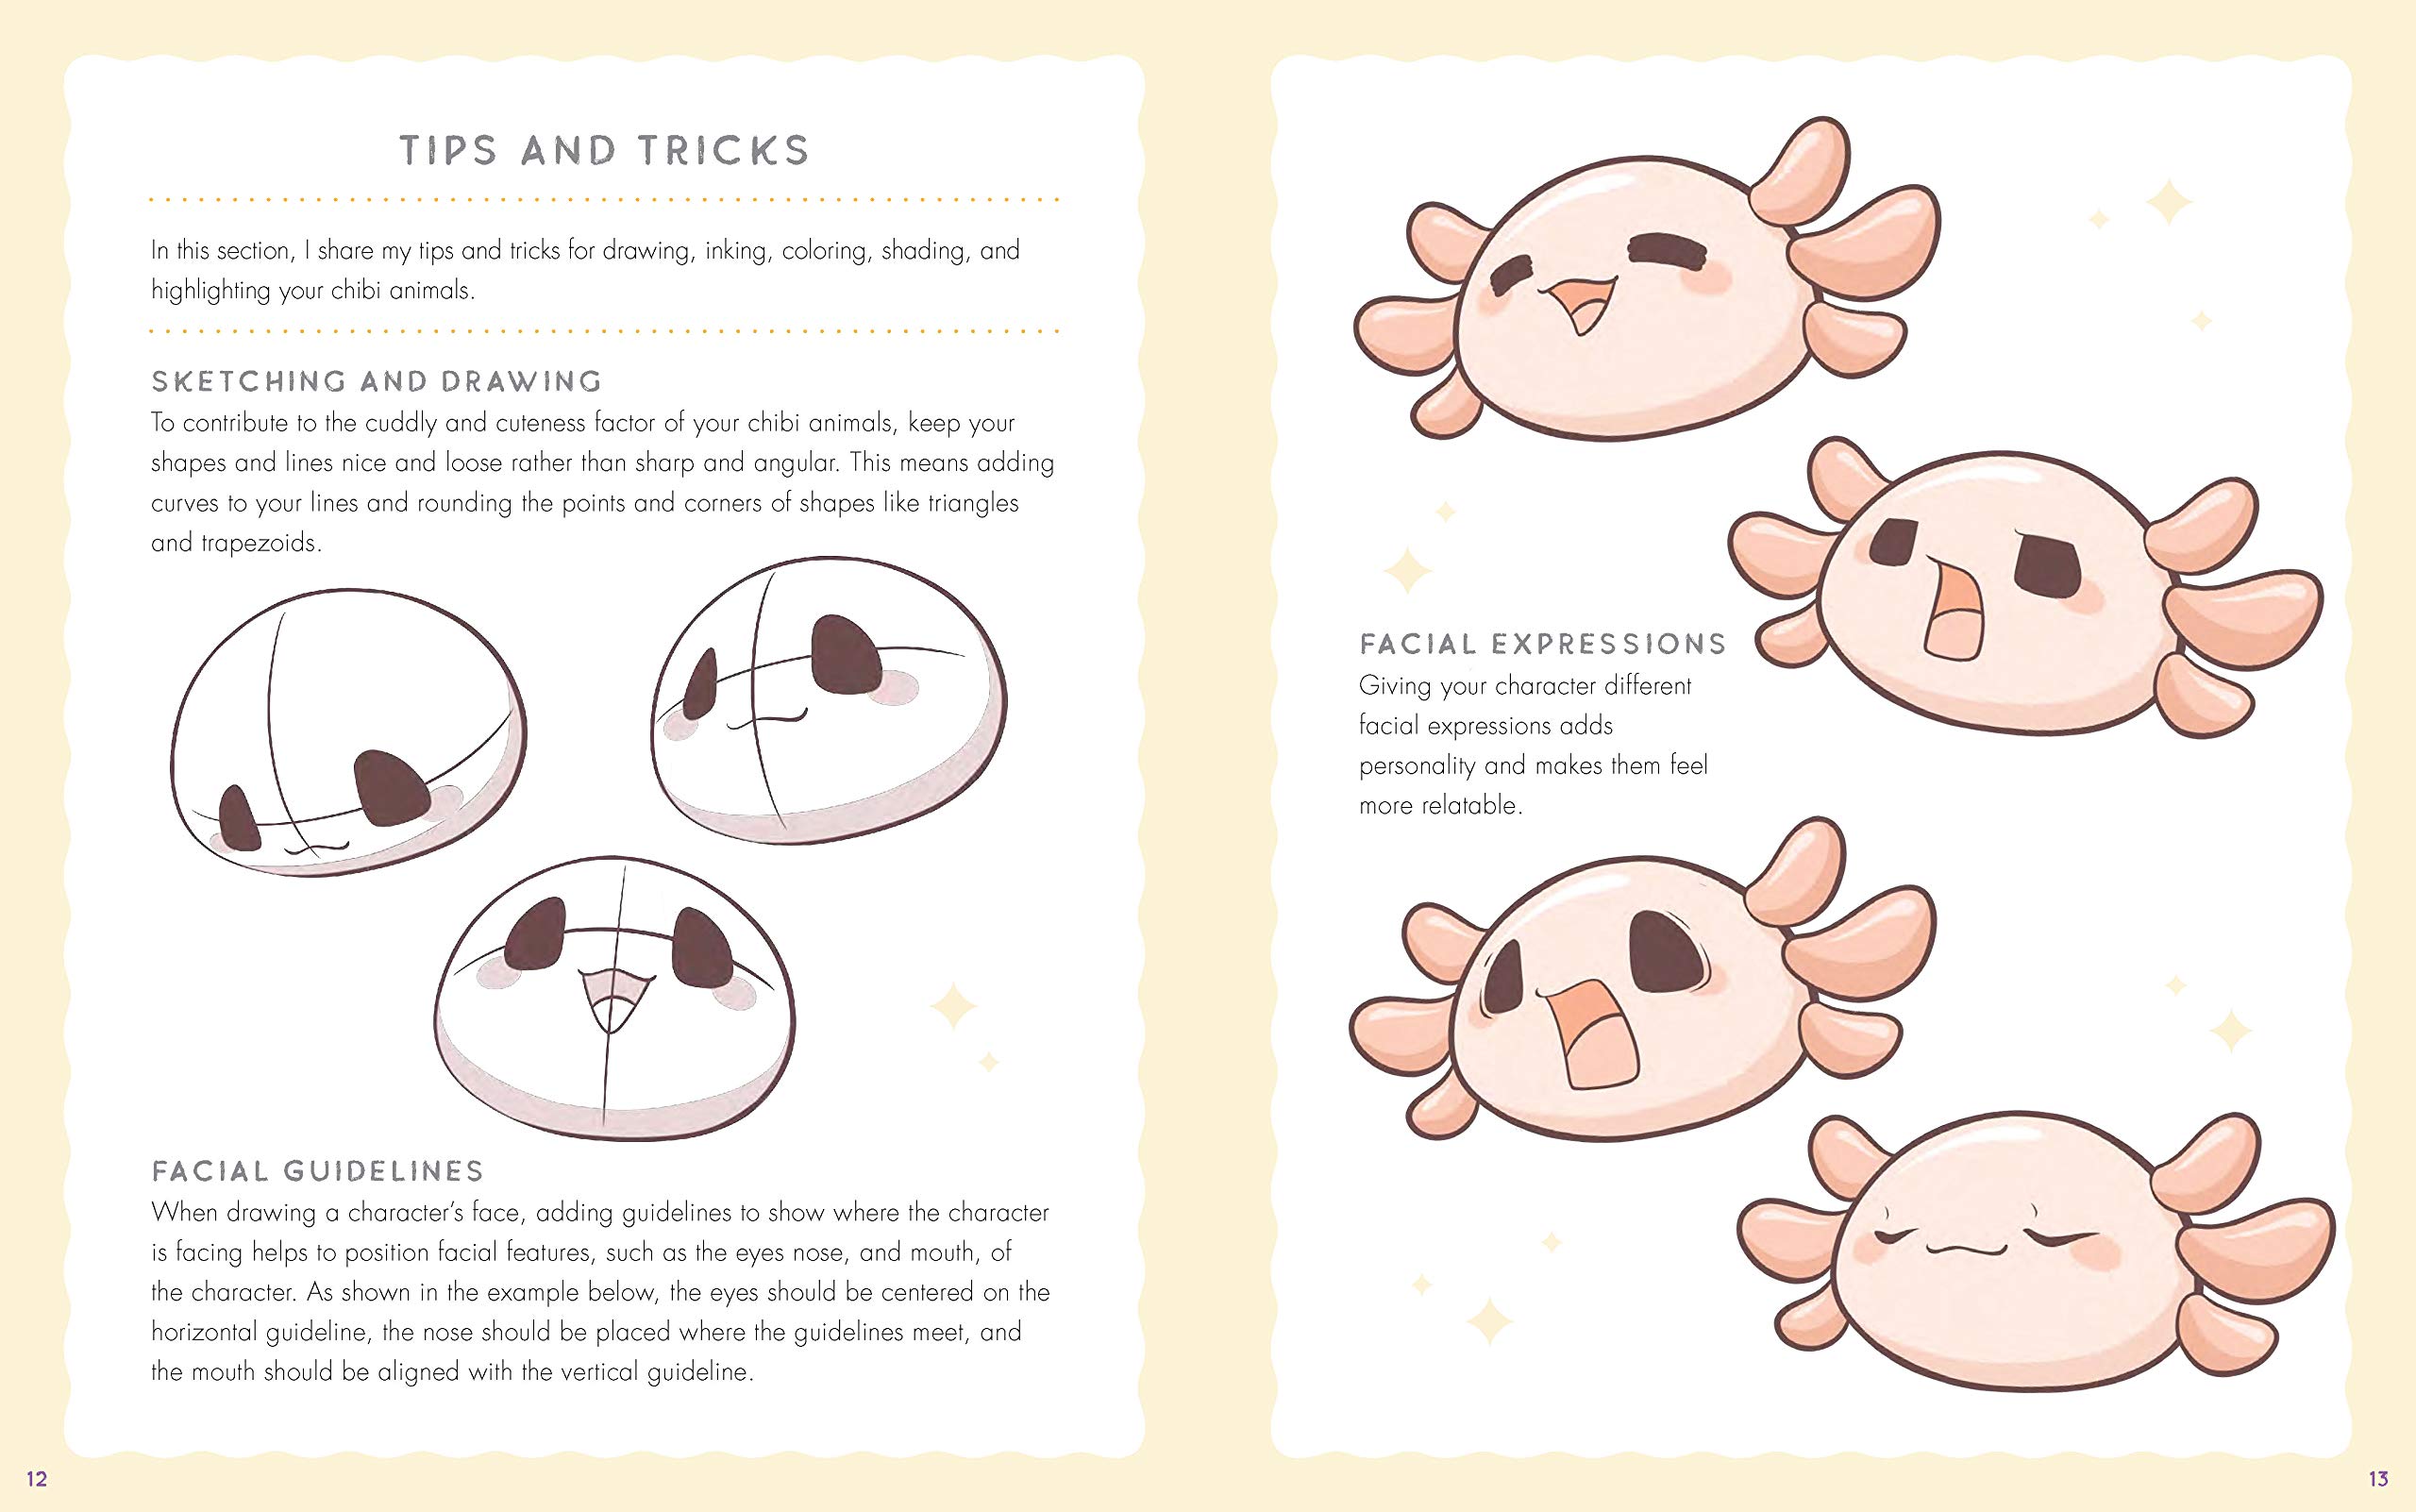 Mua Cute Chibi Animals: Learn How to Draw 75 Cuddly Creatures ...